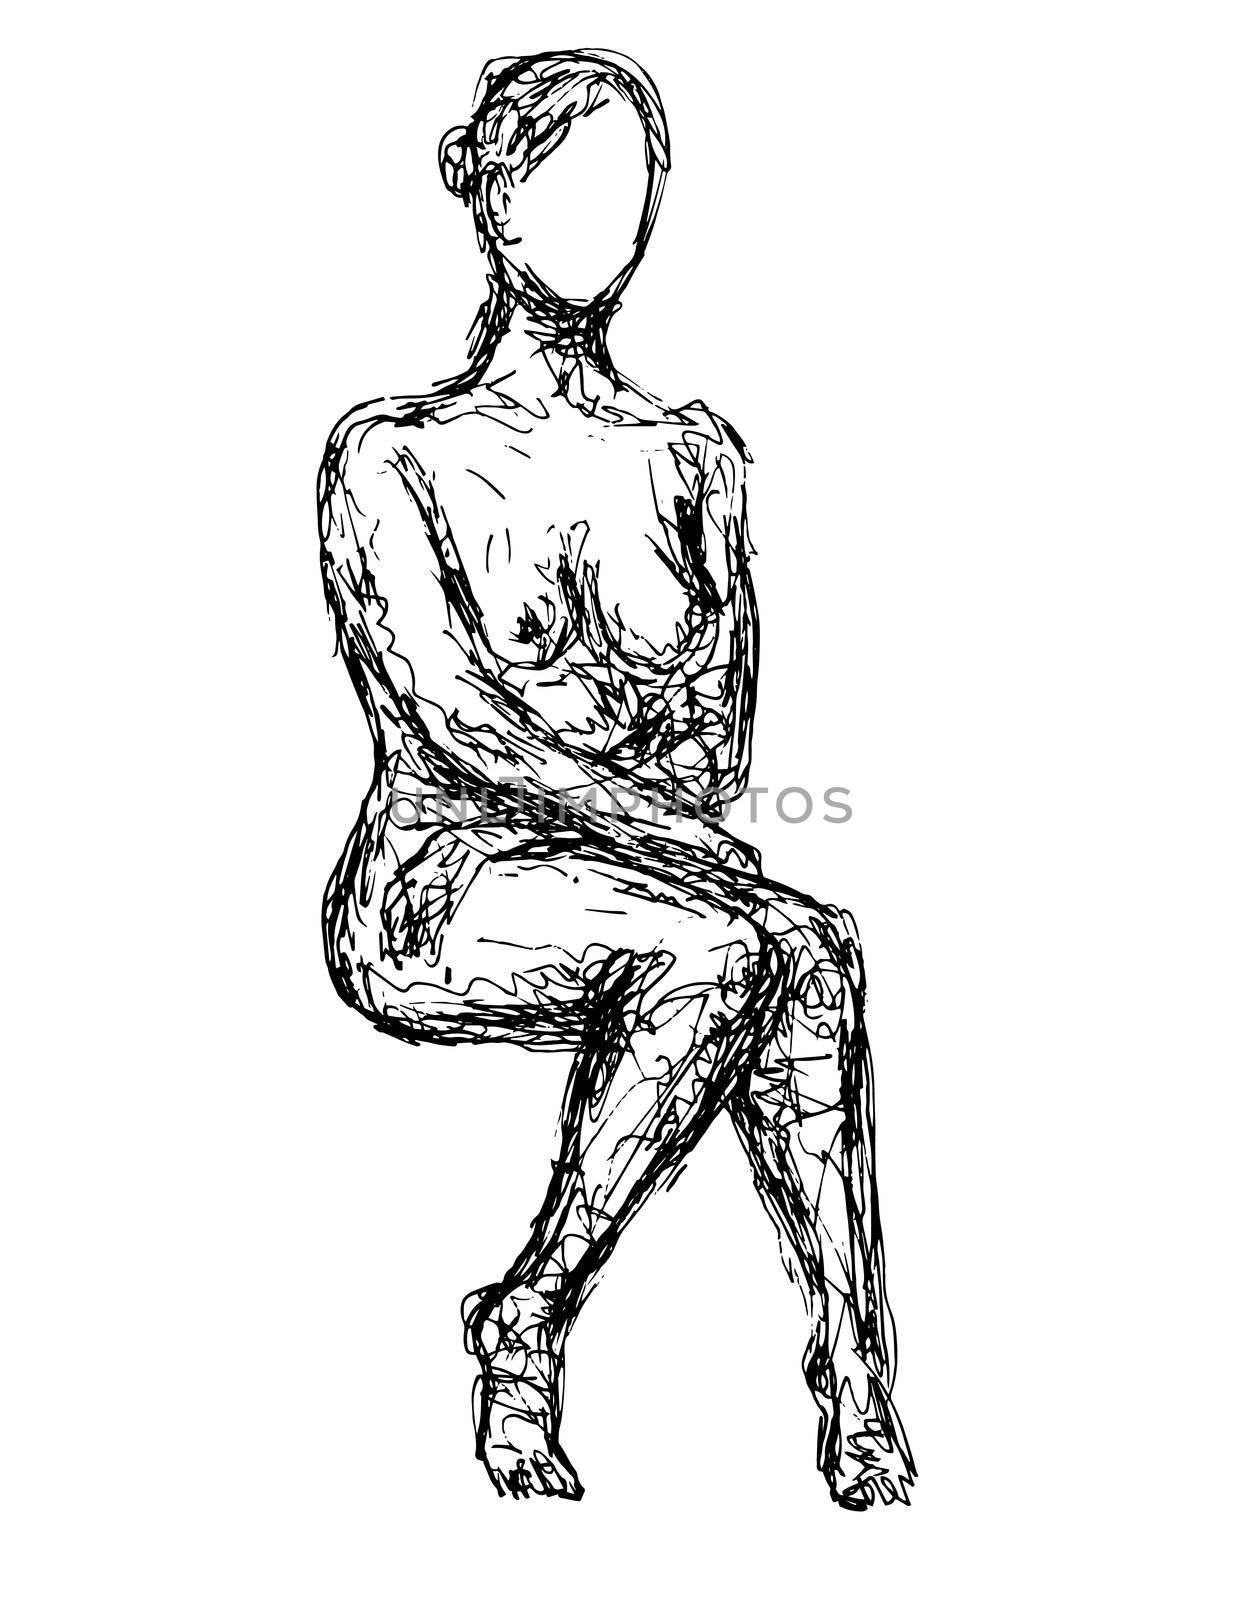 Doodle art illustration of a nude female human figure model sitting down front view done in continuous line drawing style in black and white on isolated background.